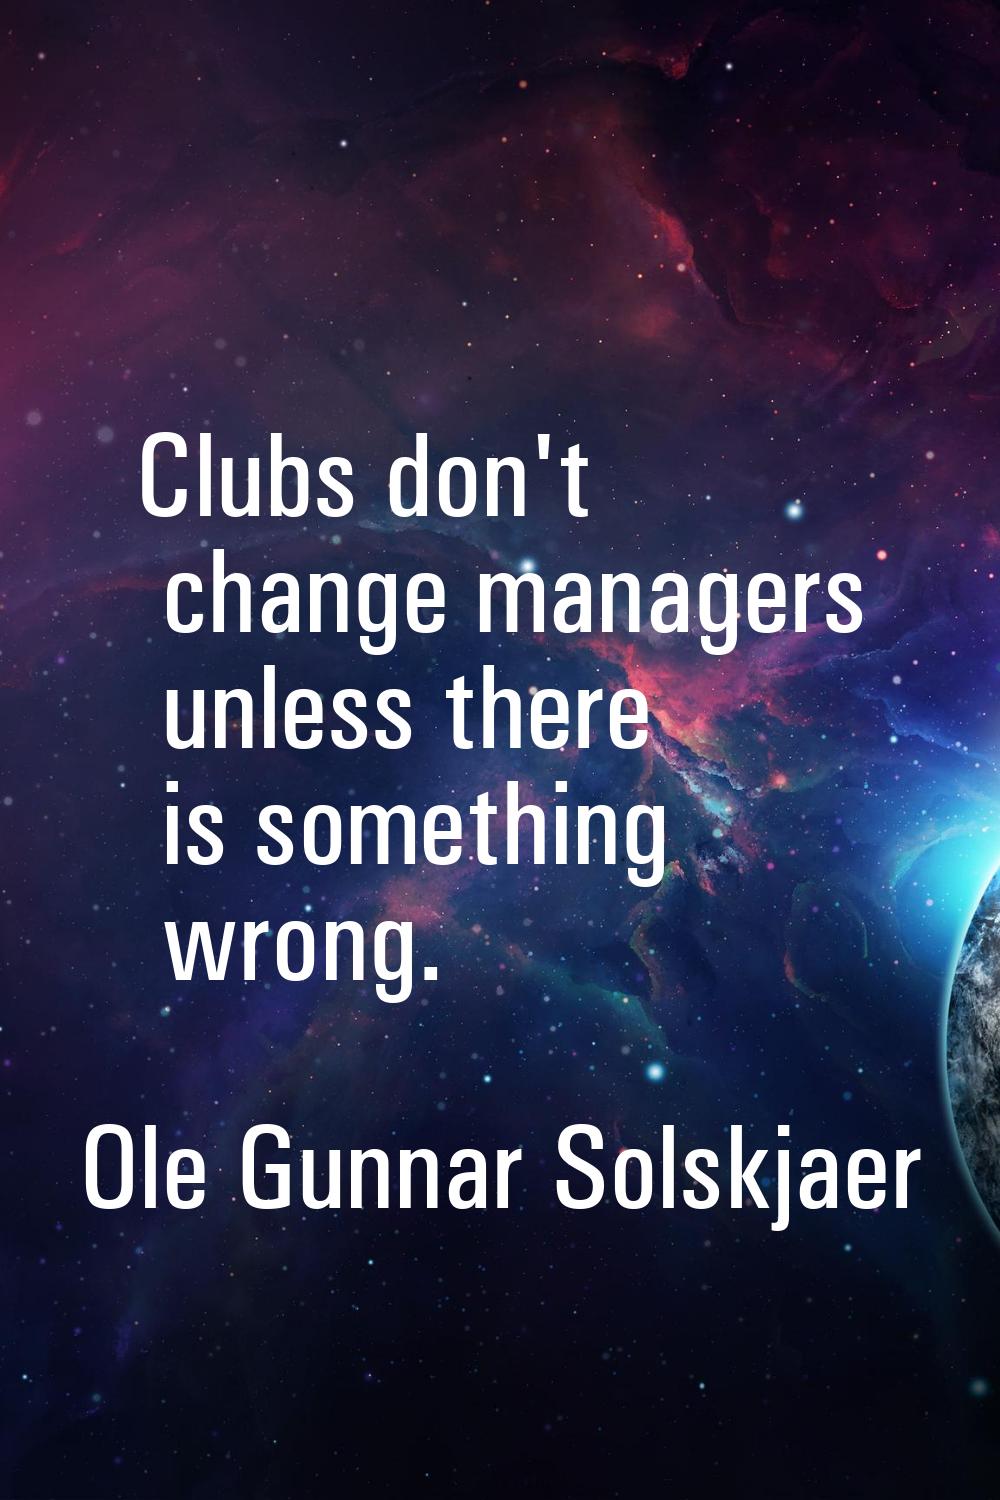 Clubs don't change managers unless there is something wrong.